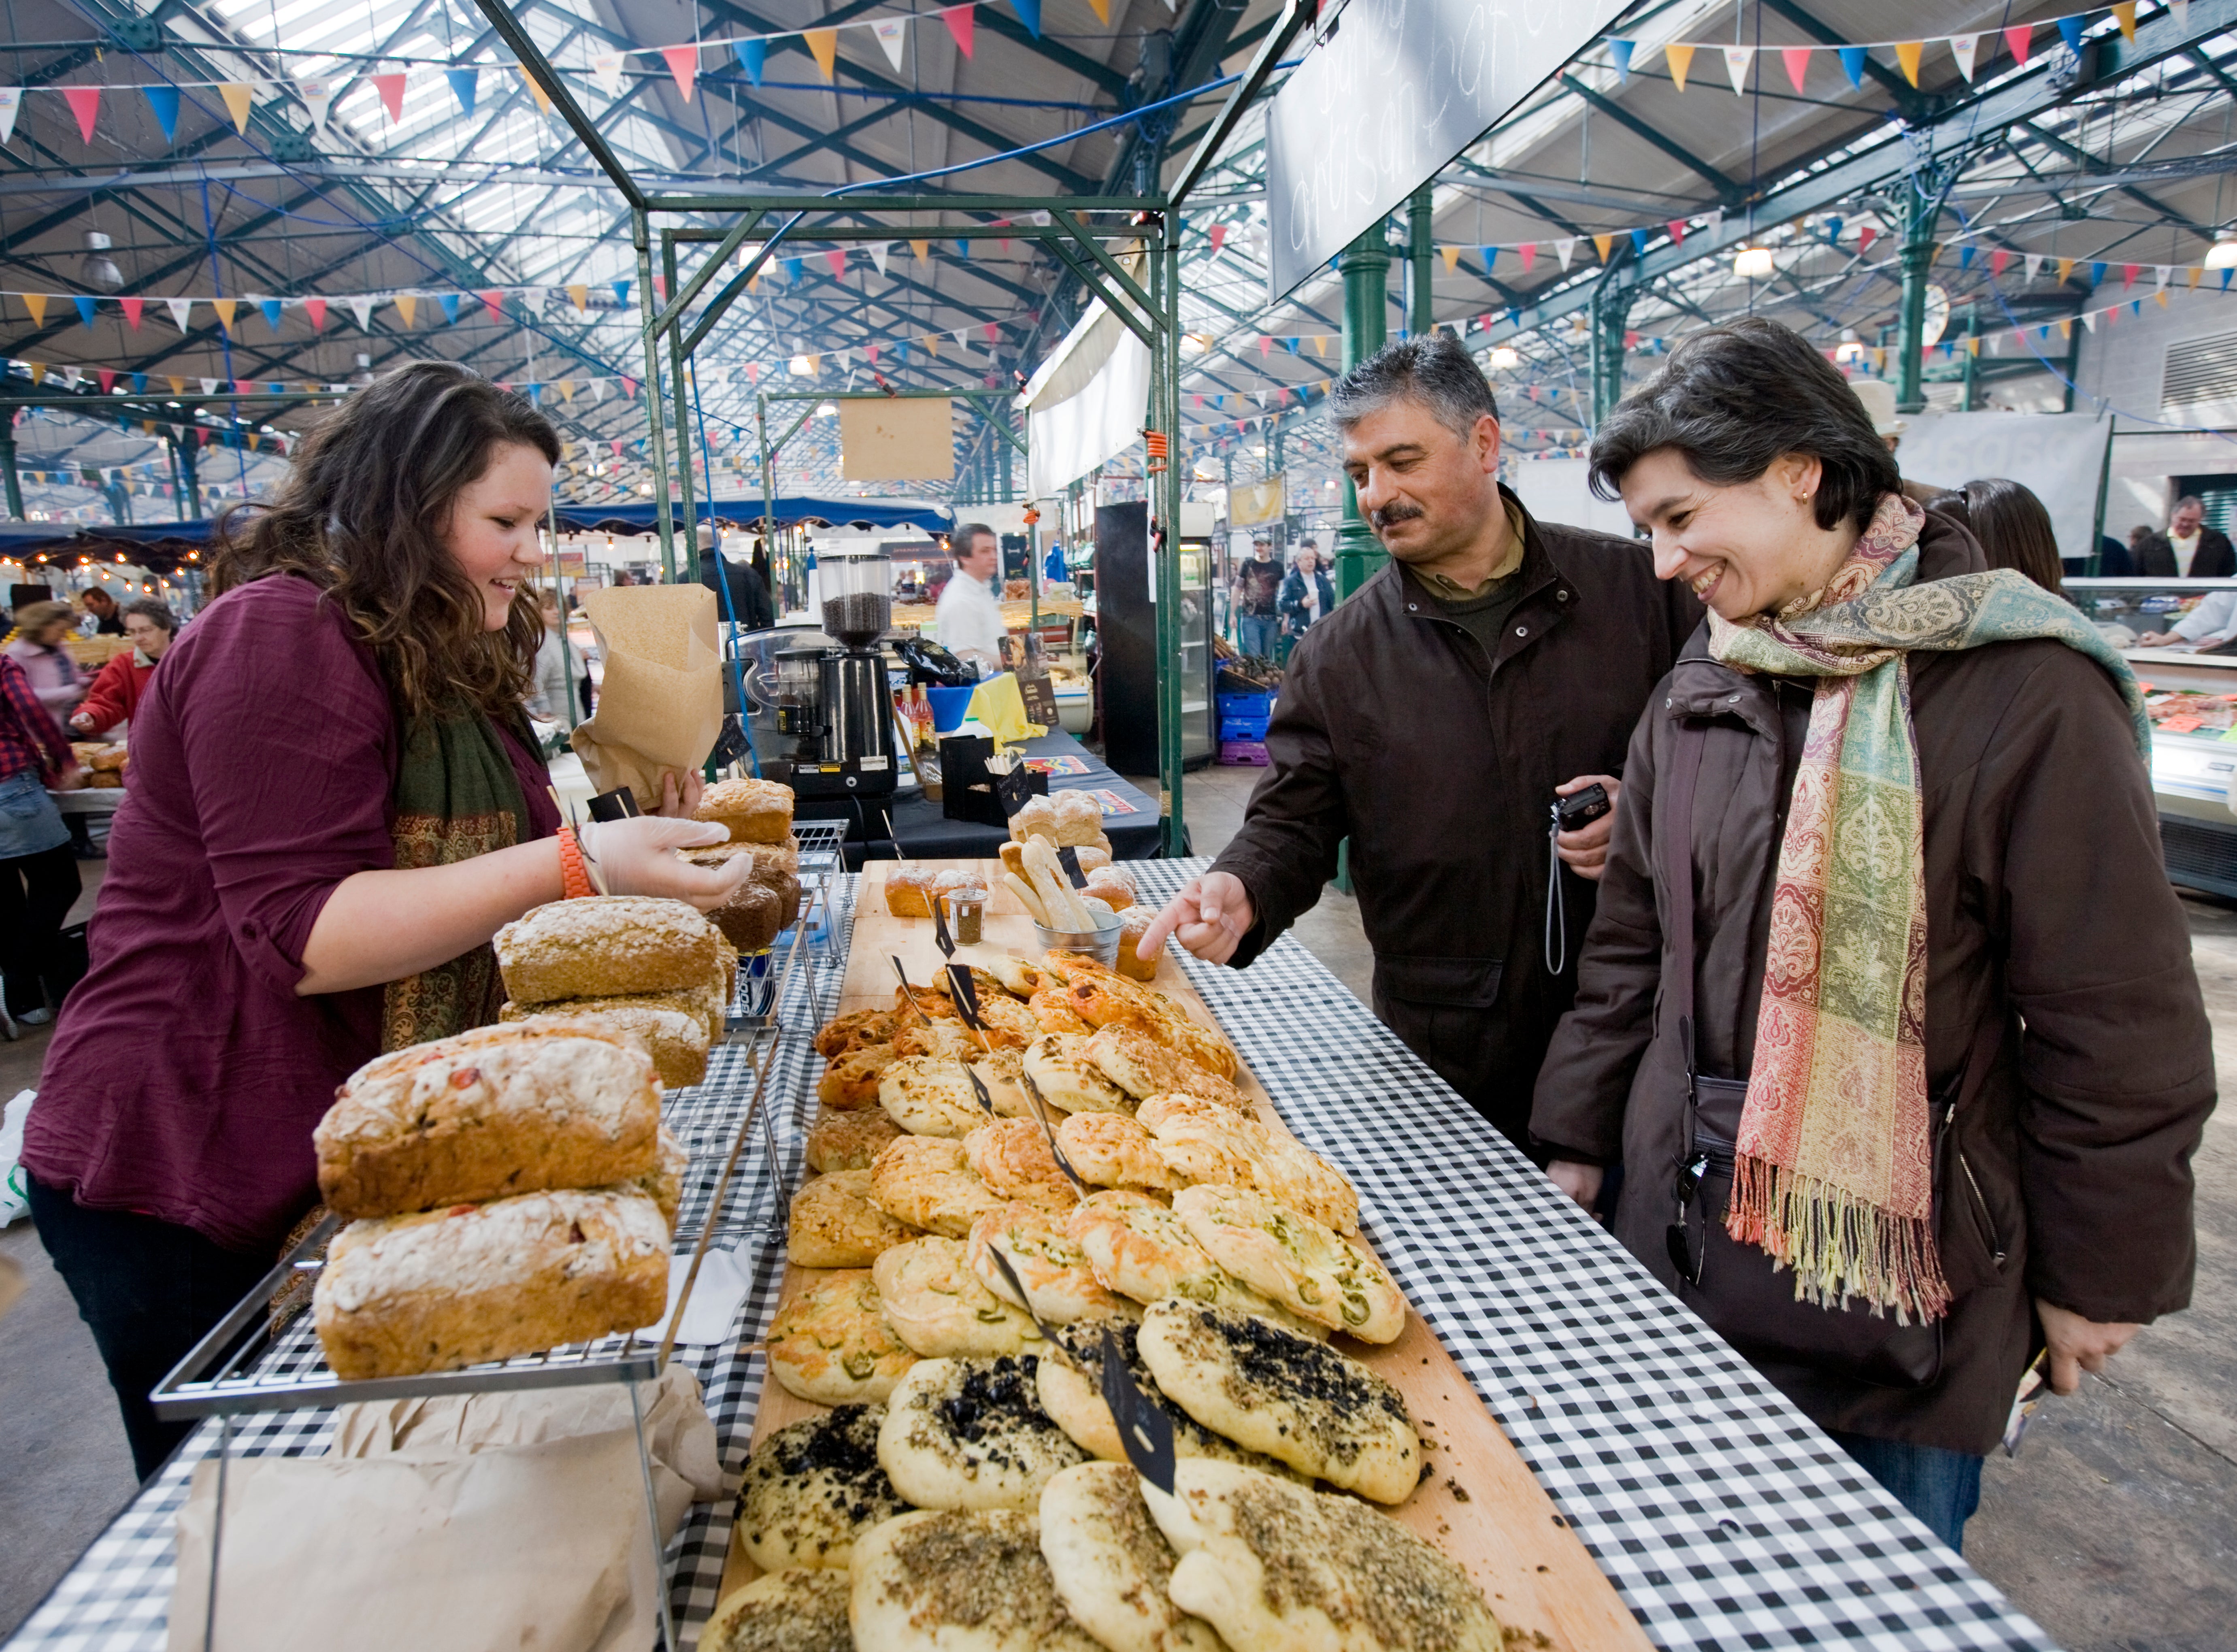 Baked goods at St George’s Market